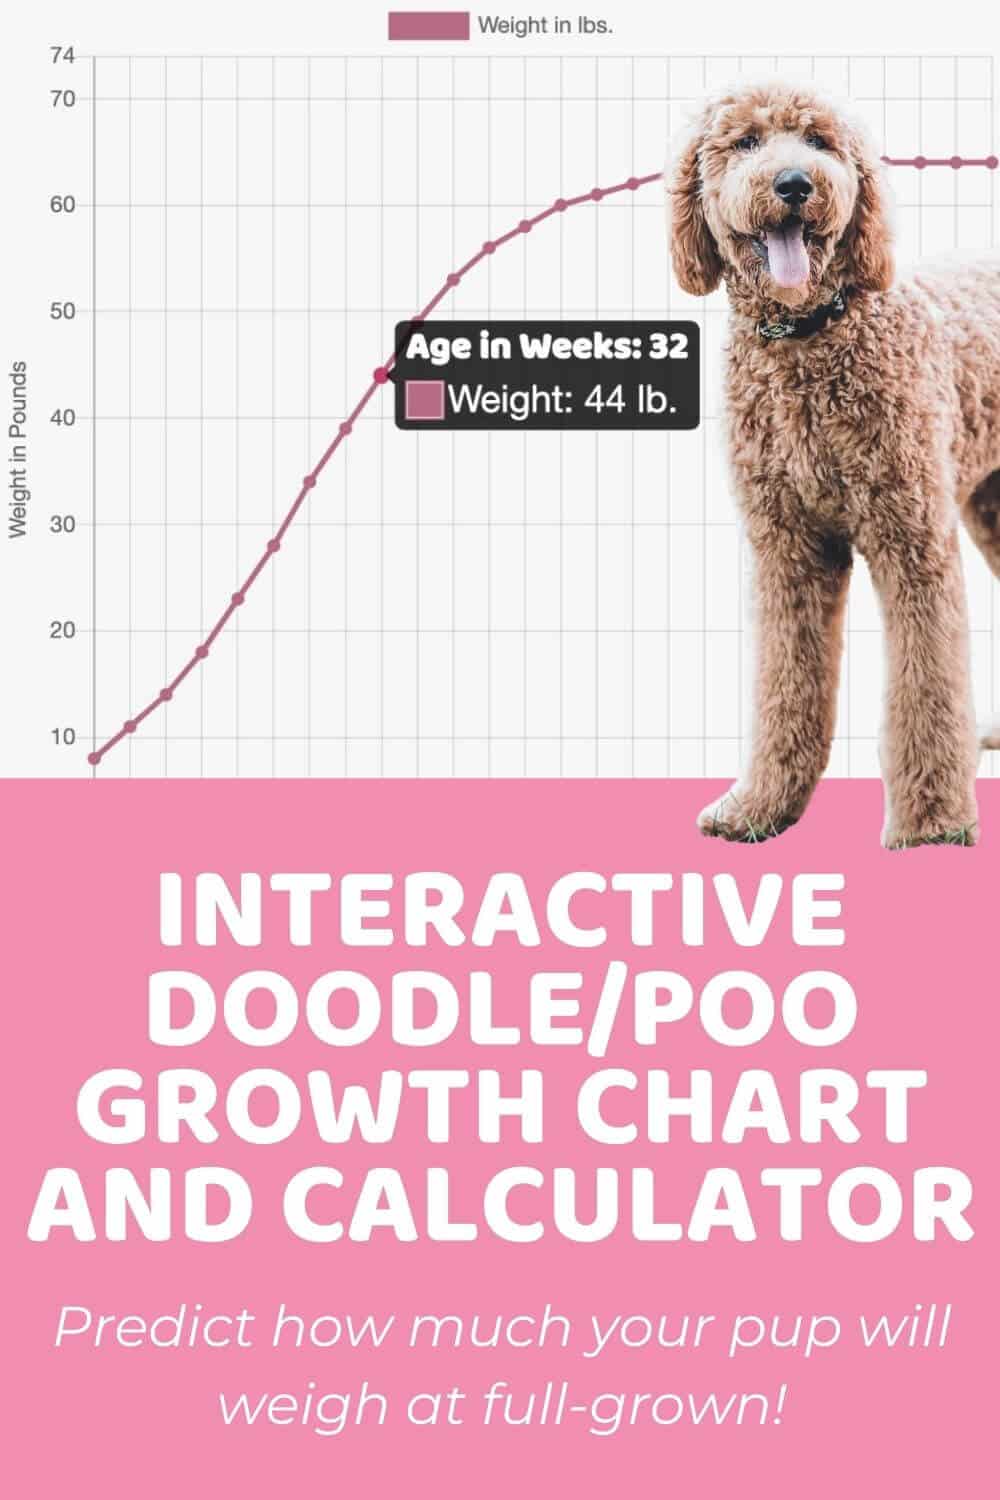 Puppy Growth Chart For Doodles And